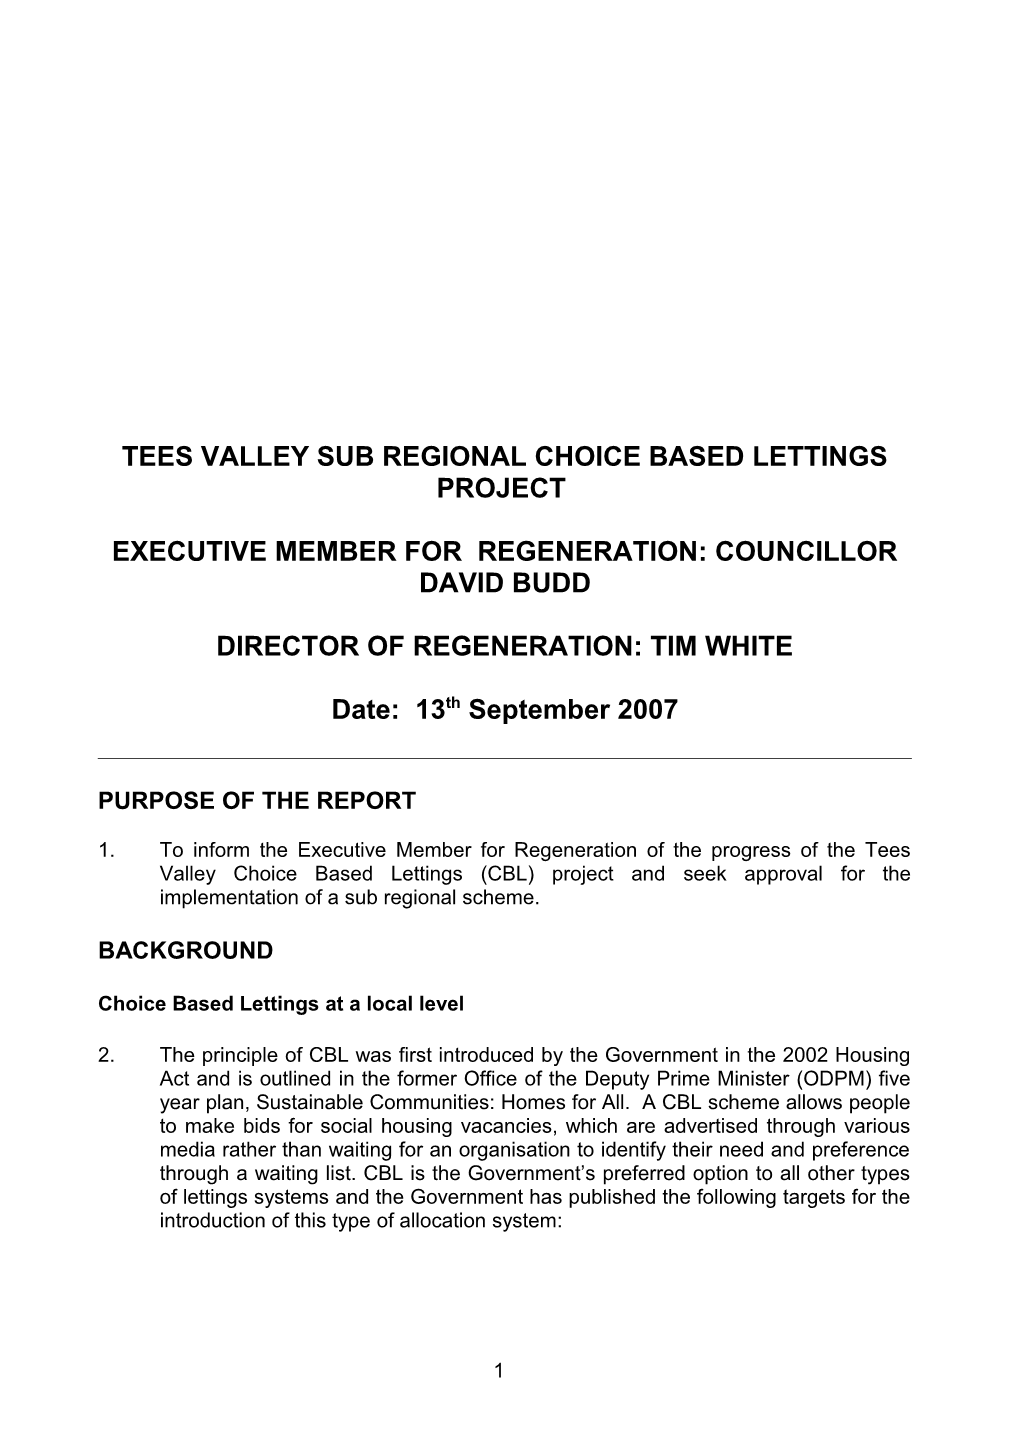 Tees Valley Sub Regional Choice Based Lettings Project